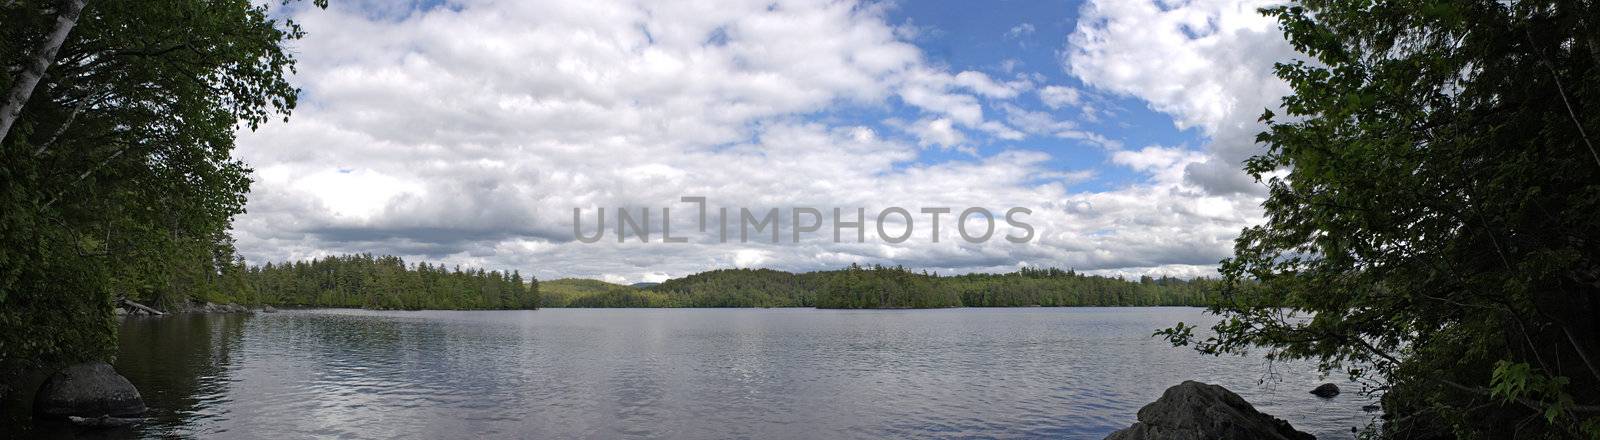 A wide angle panoramic view of the lower Saranac Lake and islands located in the upstate New York Adirondacks.